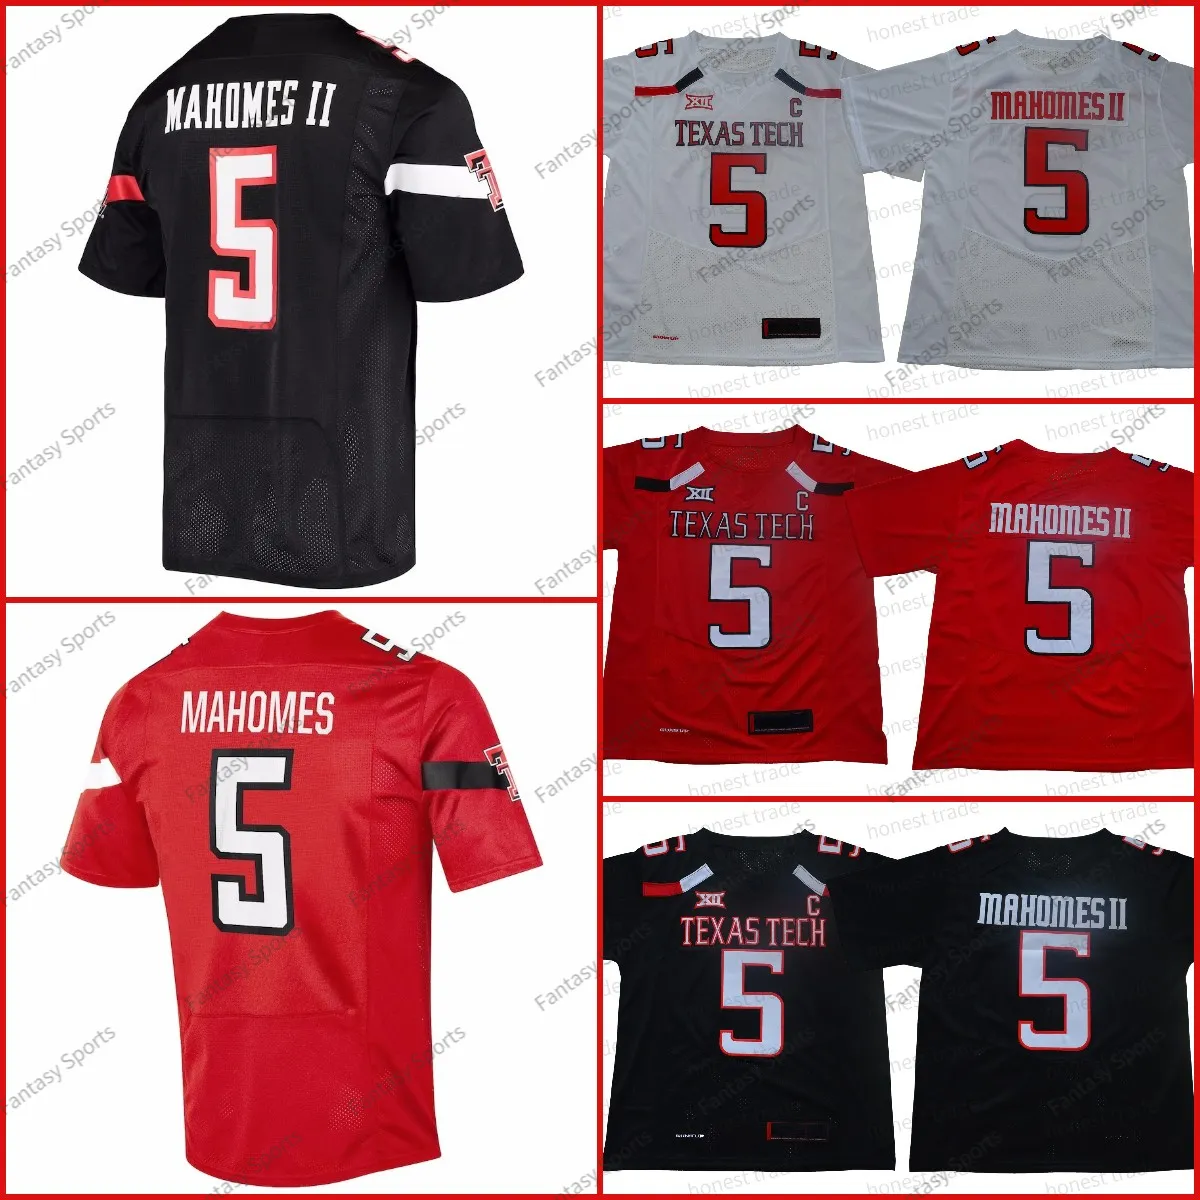 Mahomes College Football Jersey Patrick Mahomes II Jeresey Texas Tech Football Jerseys Red White Men Size S-3XL All Stitched